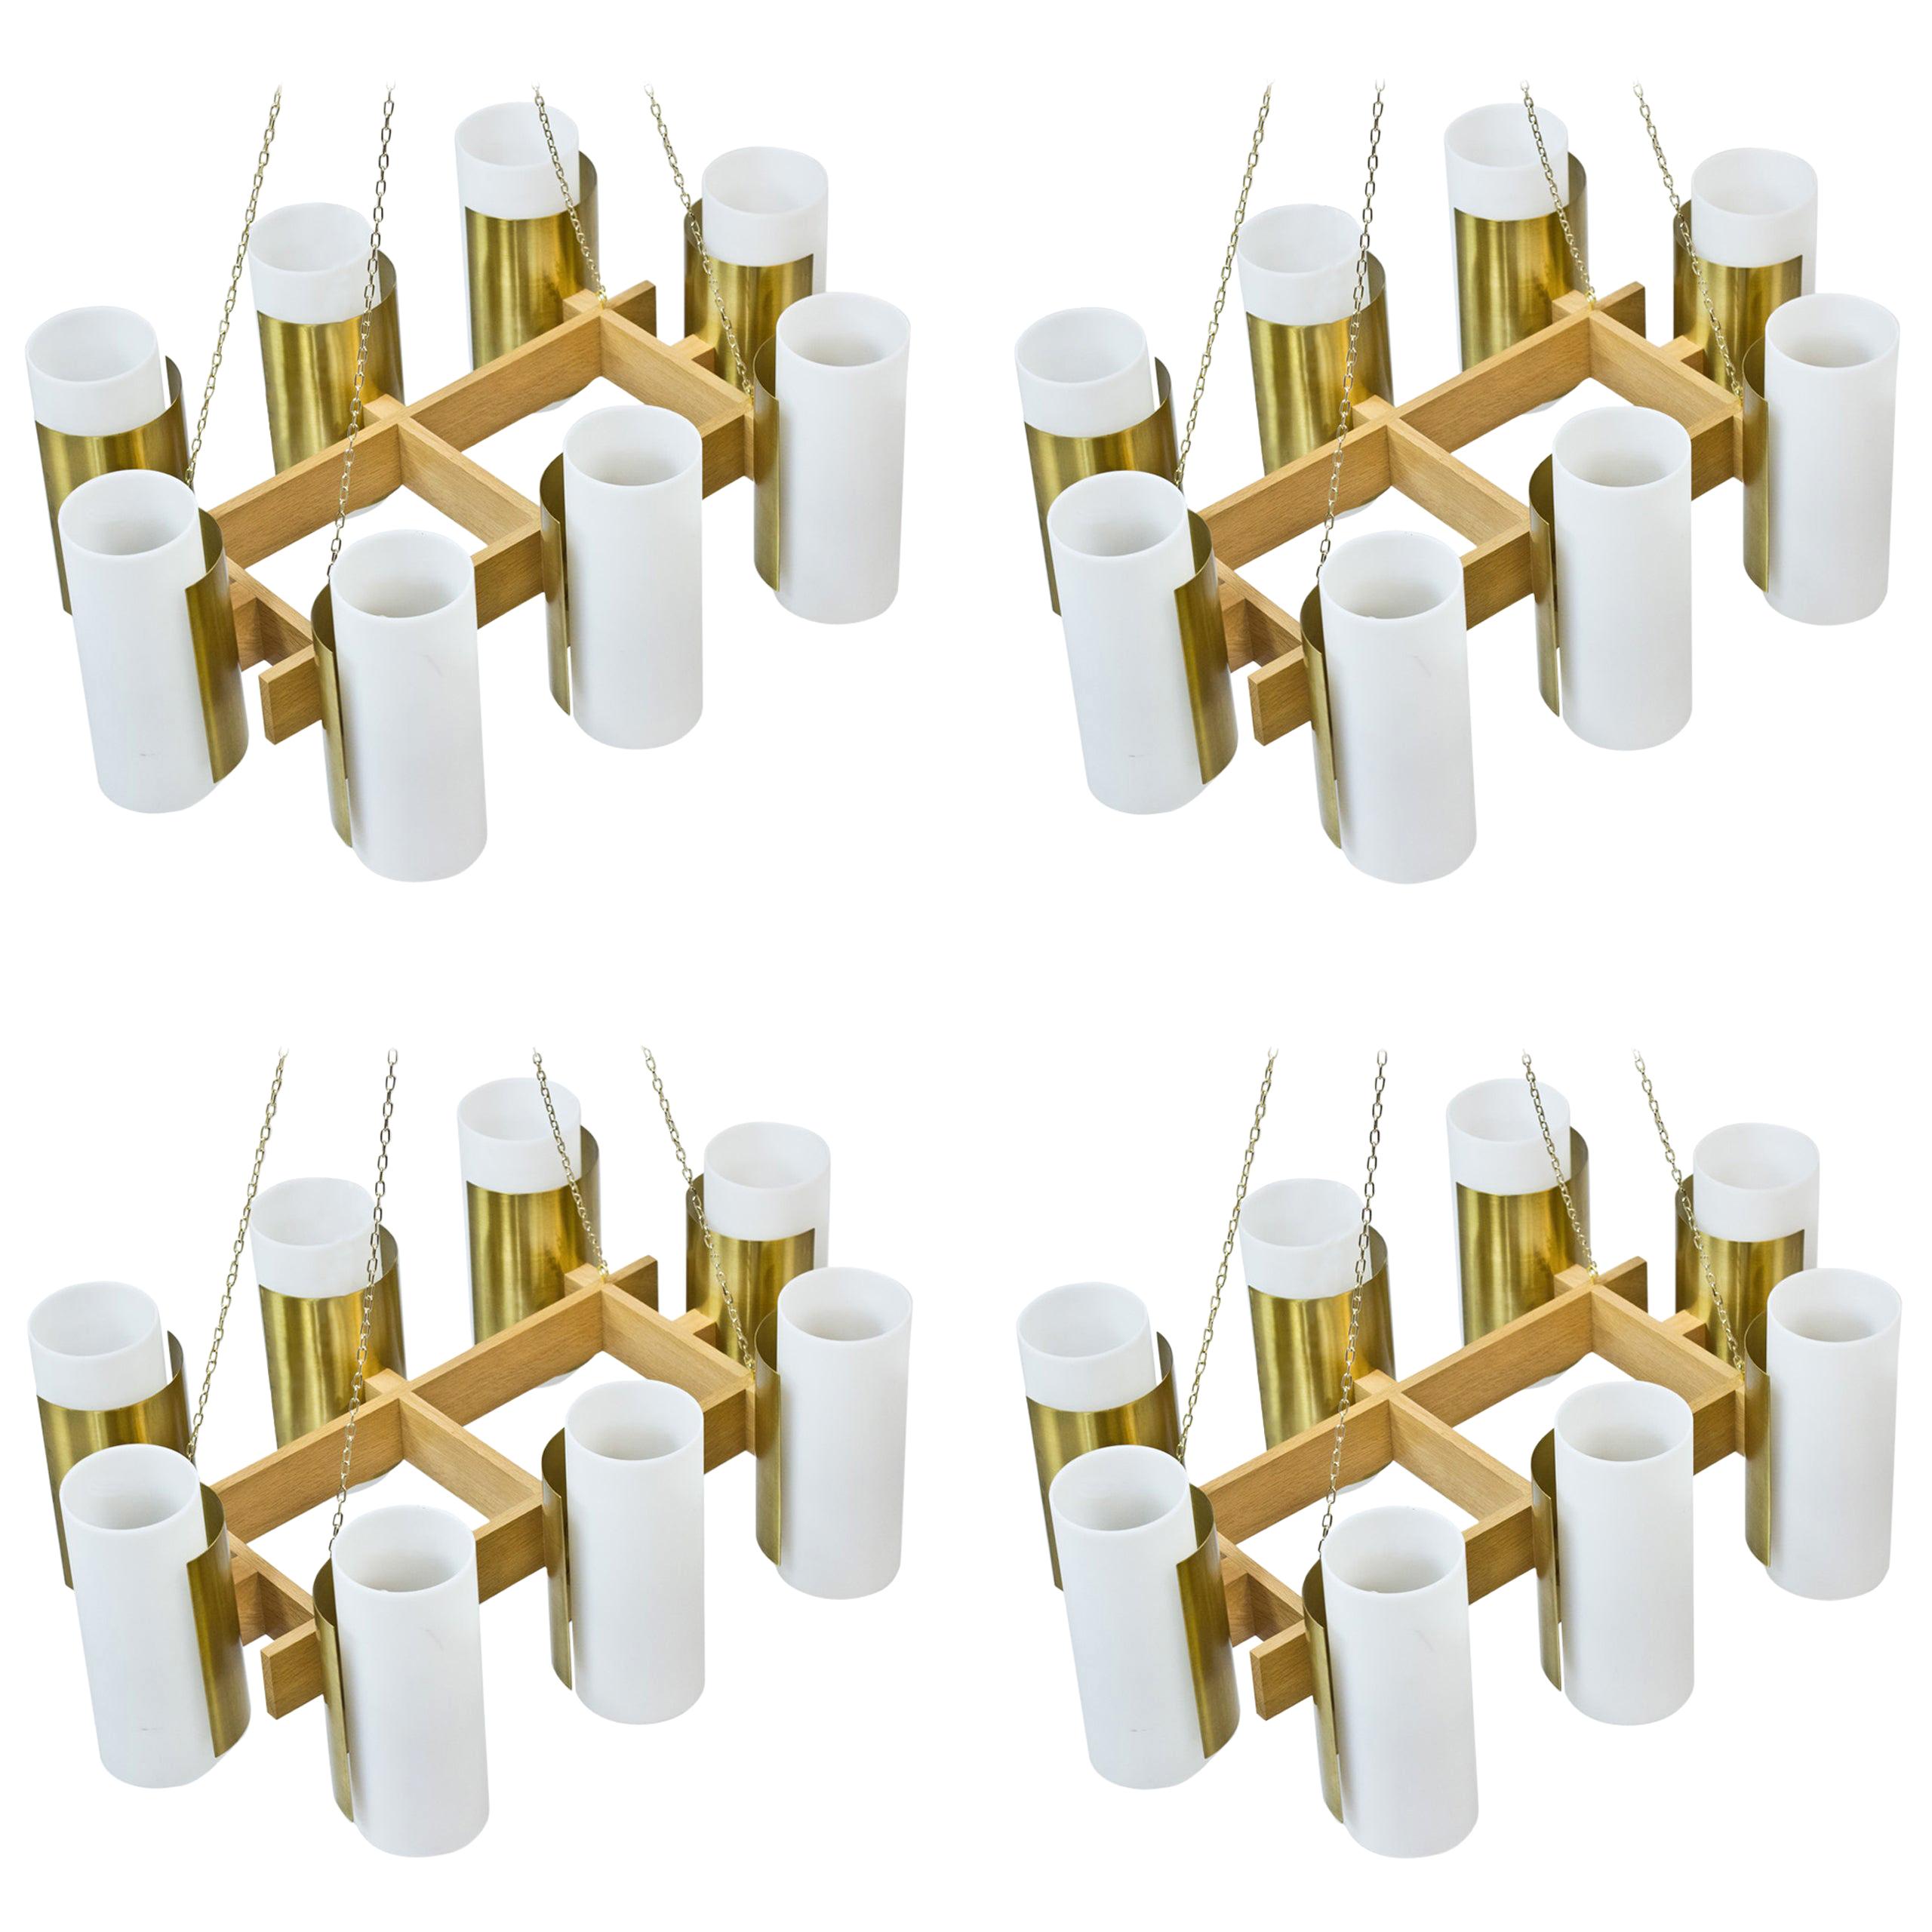 1950s Chandeliers in Oak and Brass by Sten Carlquist, for Hans Agne Jakobsson For Sale